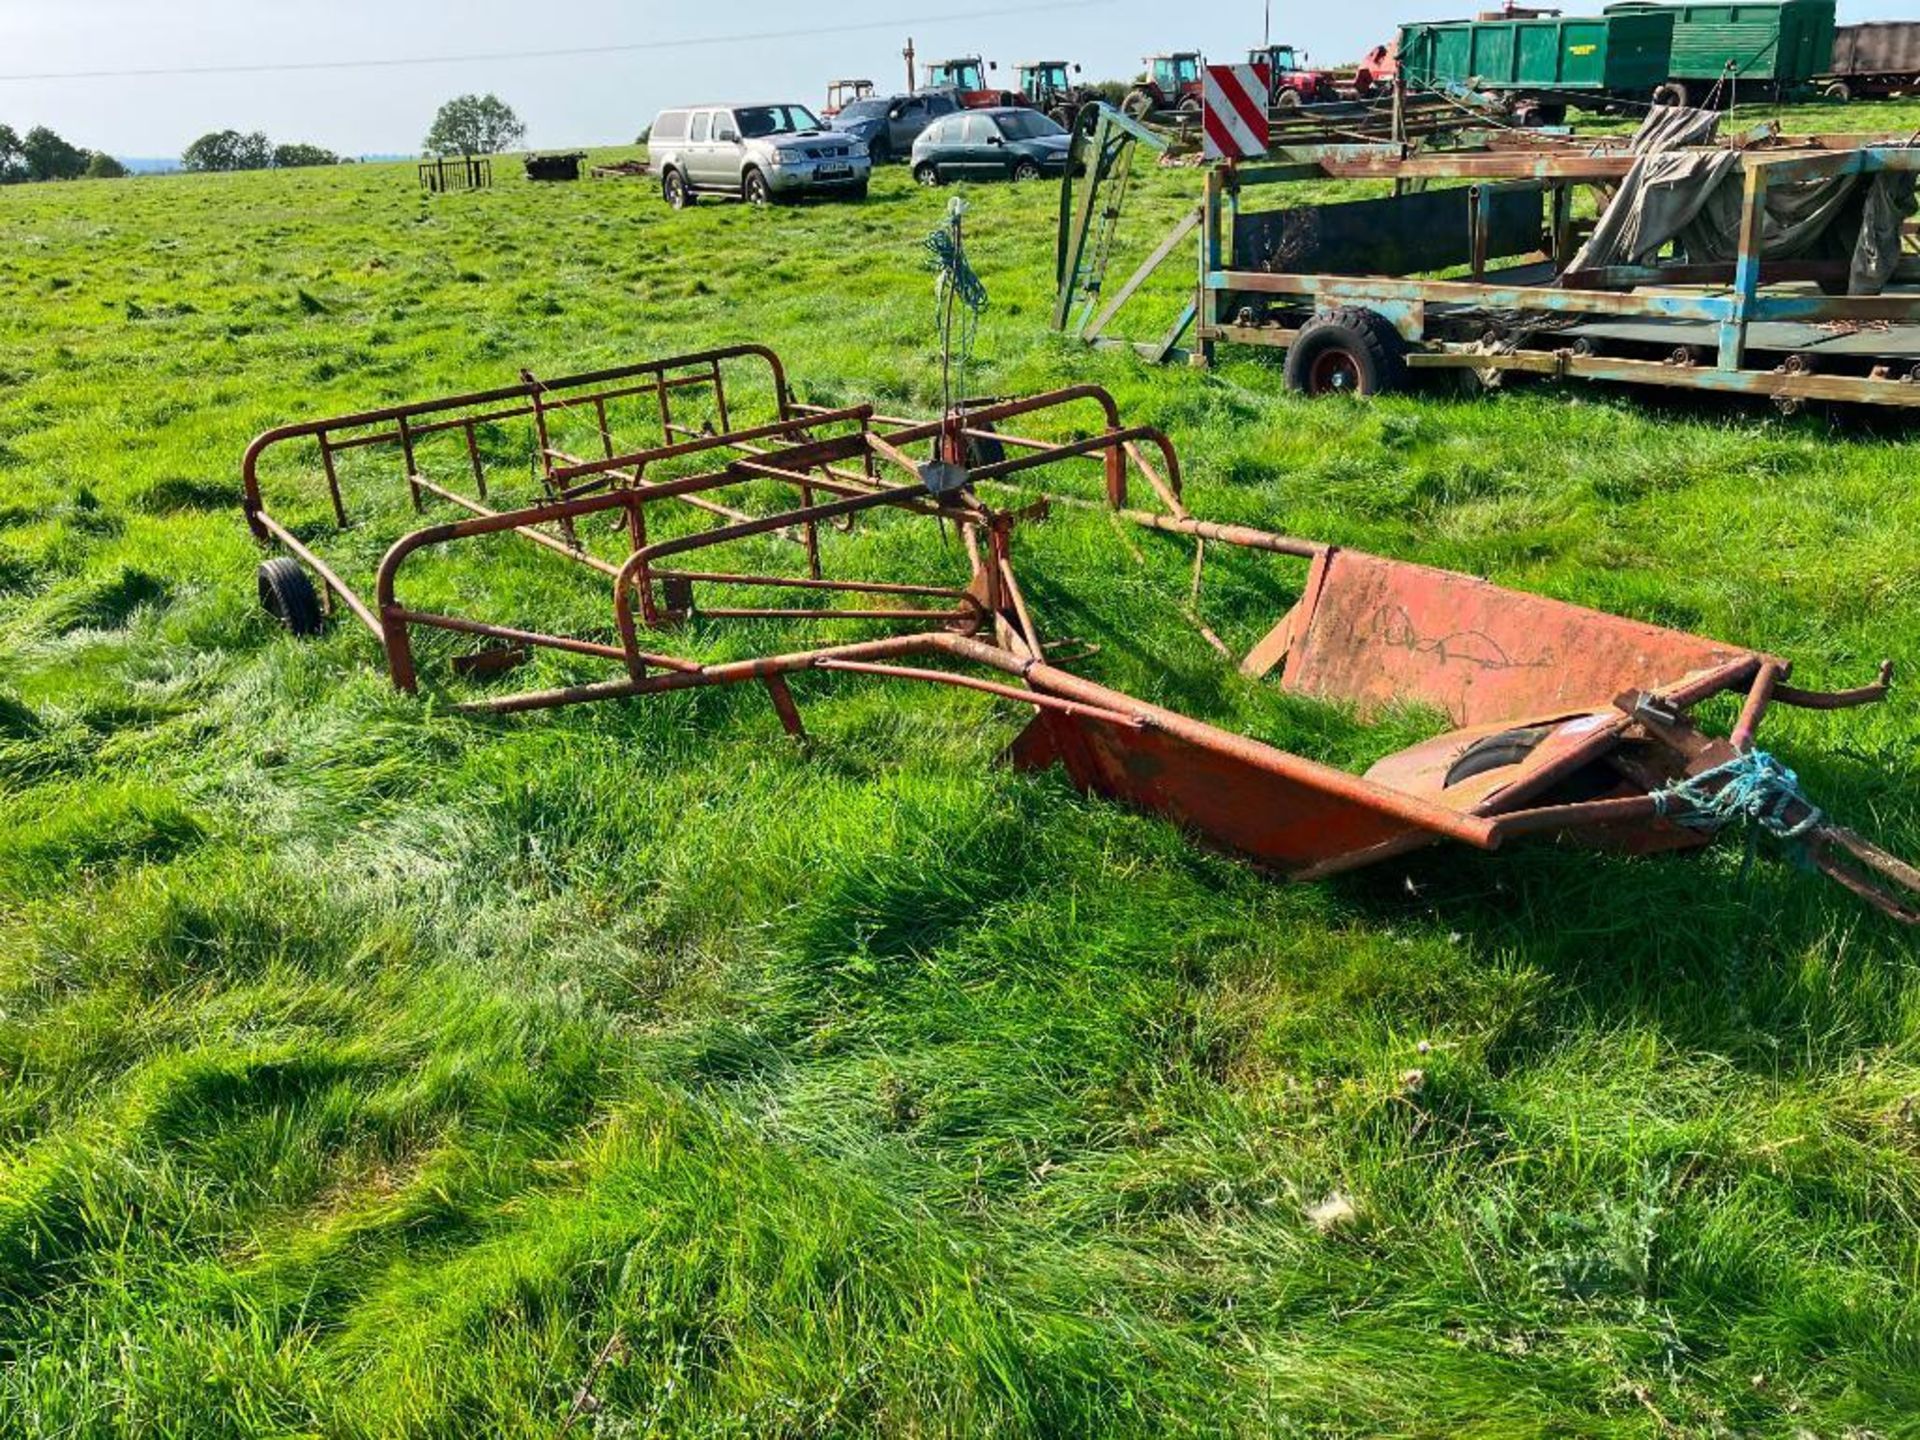 Browns flat 8 bale sledge - Image 4 of 4